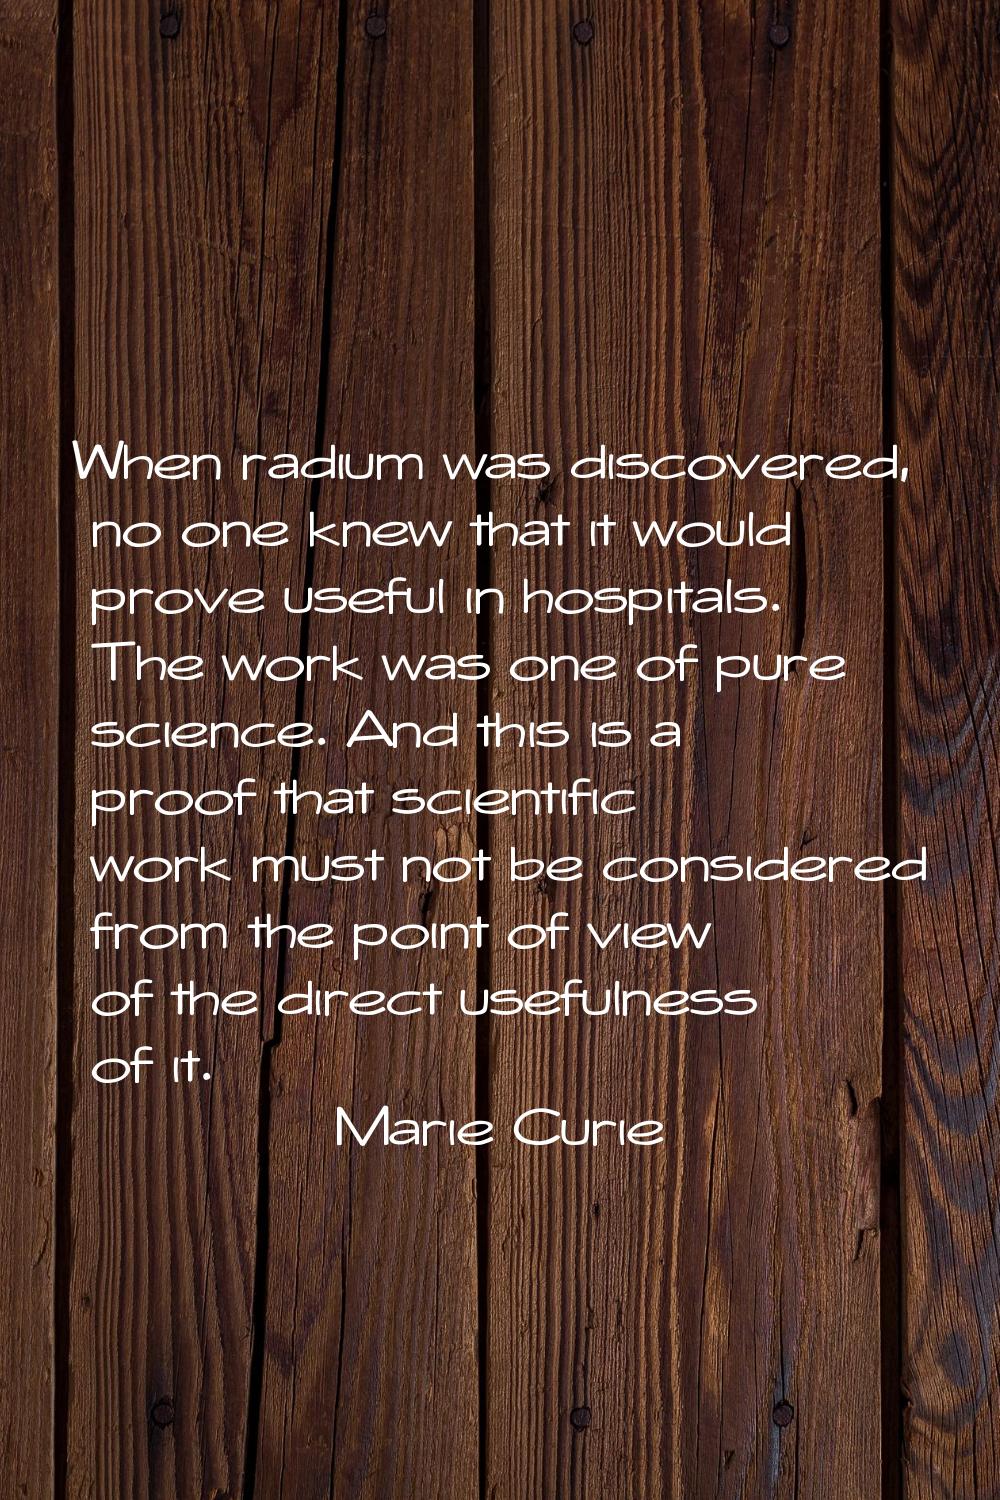 When radium was discovered, no one knew that it would prove useful in hospitals. The work was one o